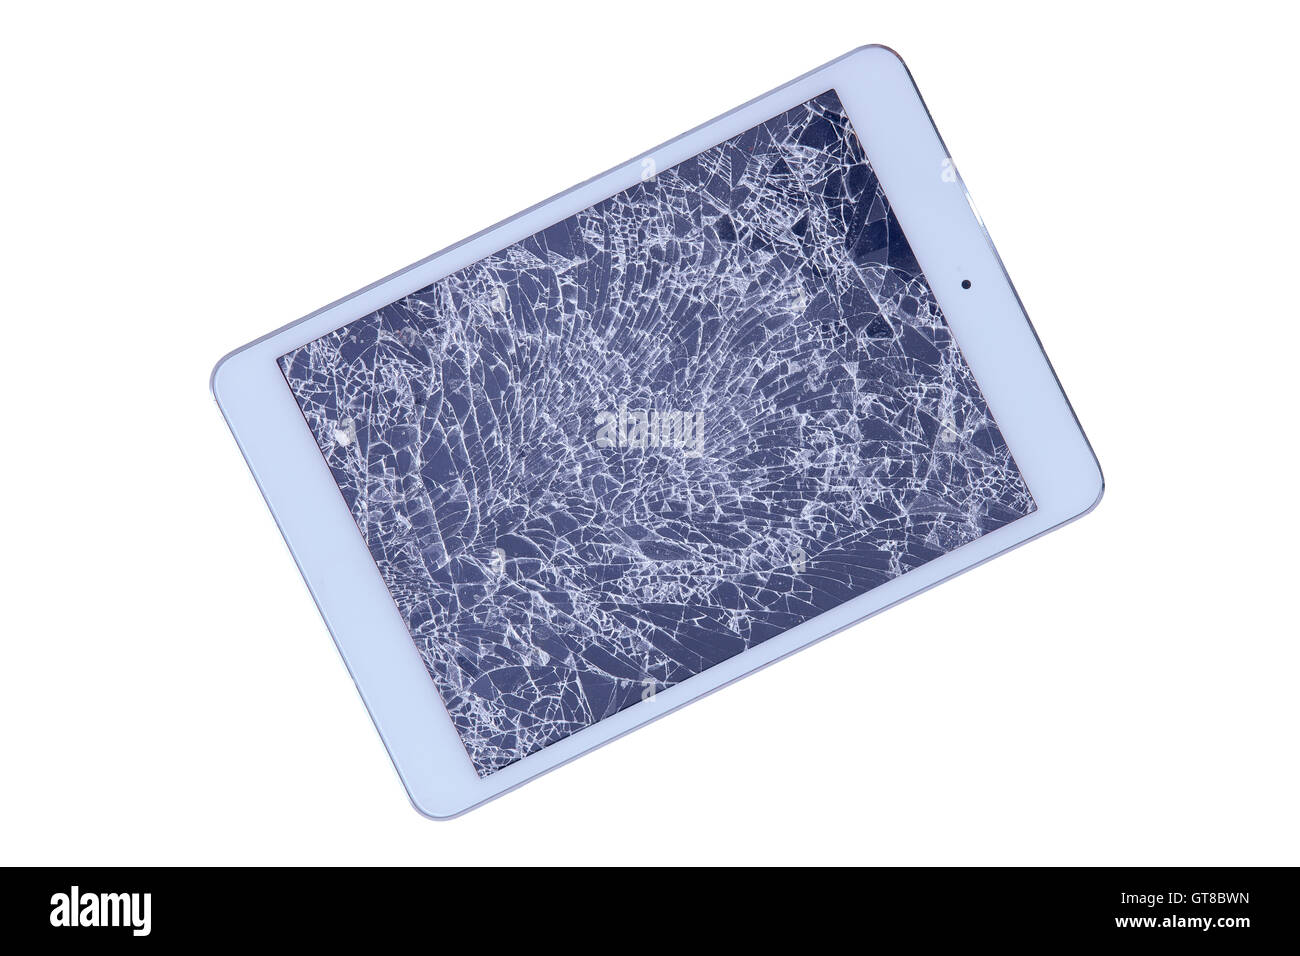 Tablet with a shattered glass screen rendered unusable after an accident or fall viewed isolated on white from above, diagonal w Stock Photo